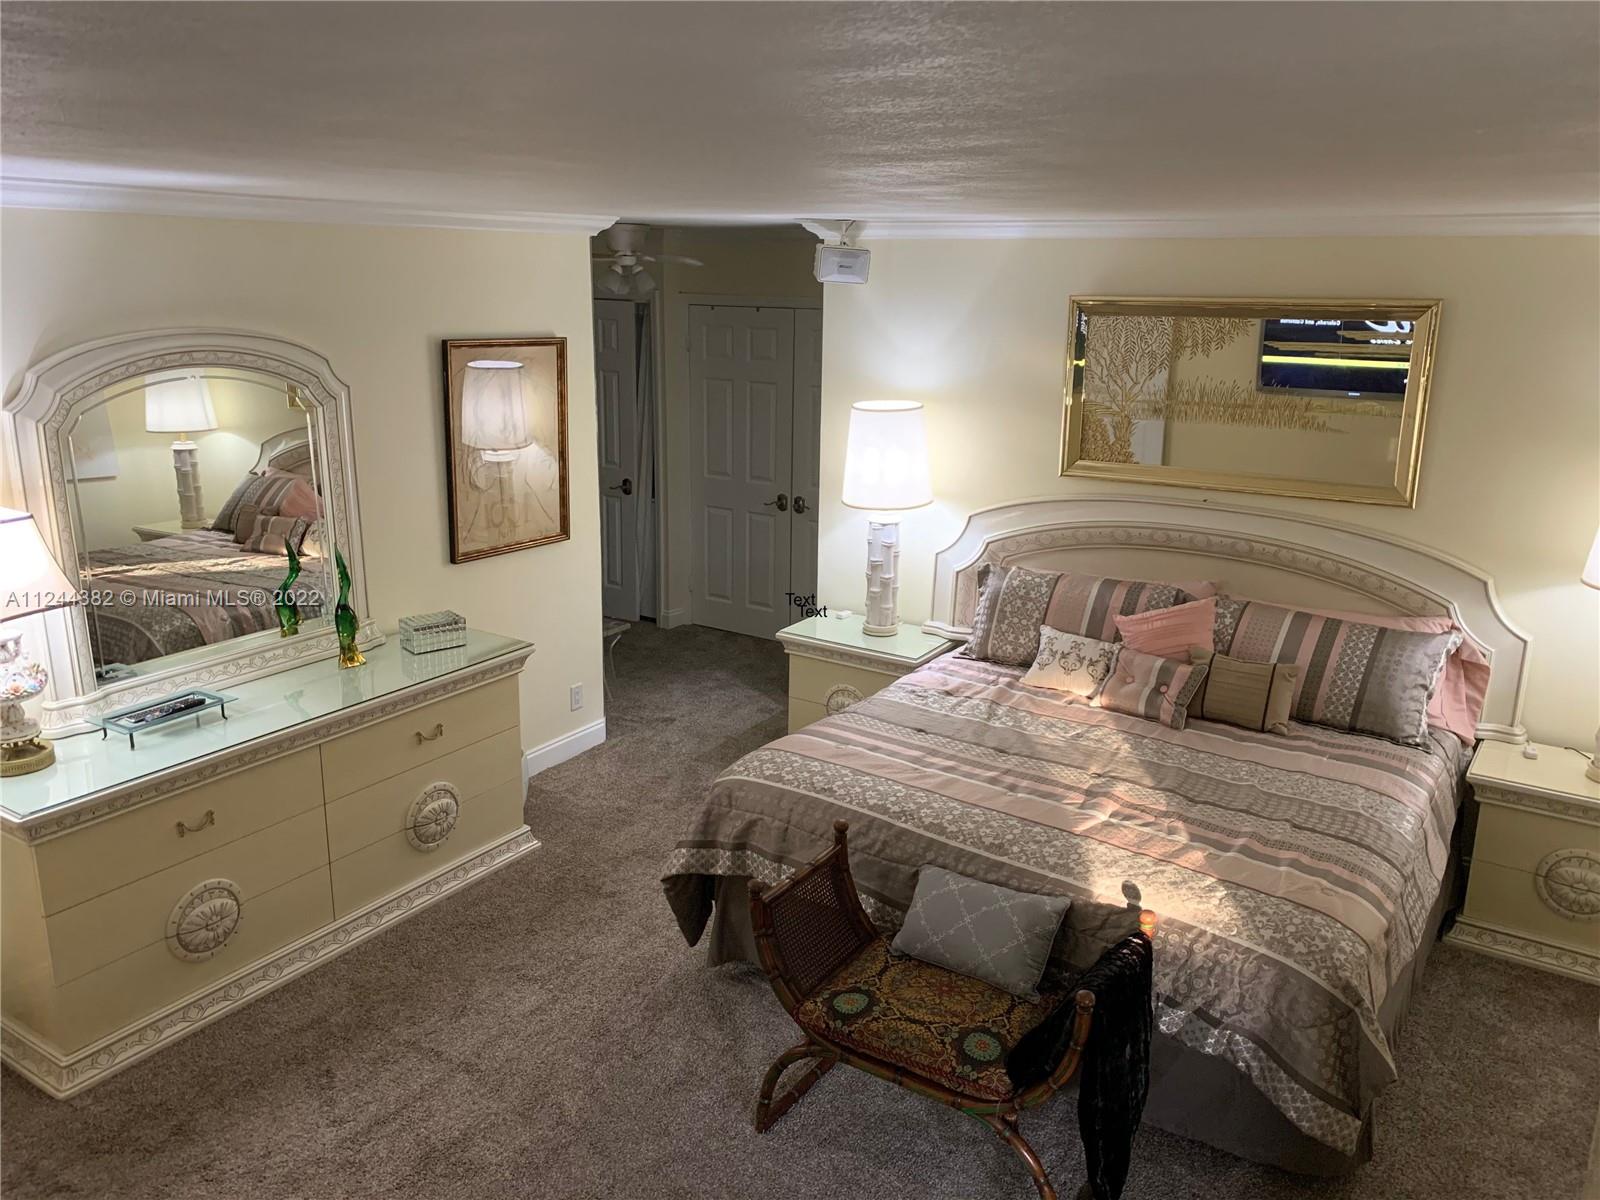 PLUS SIZED MASTER BEDROOM WITH PRIVATE DRESSING AREA AND EN SUITE BATHROOM